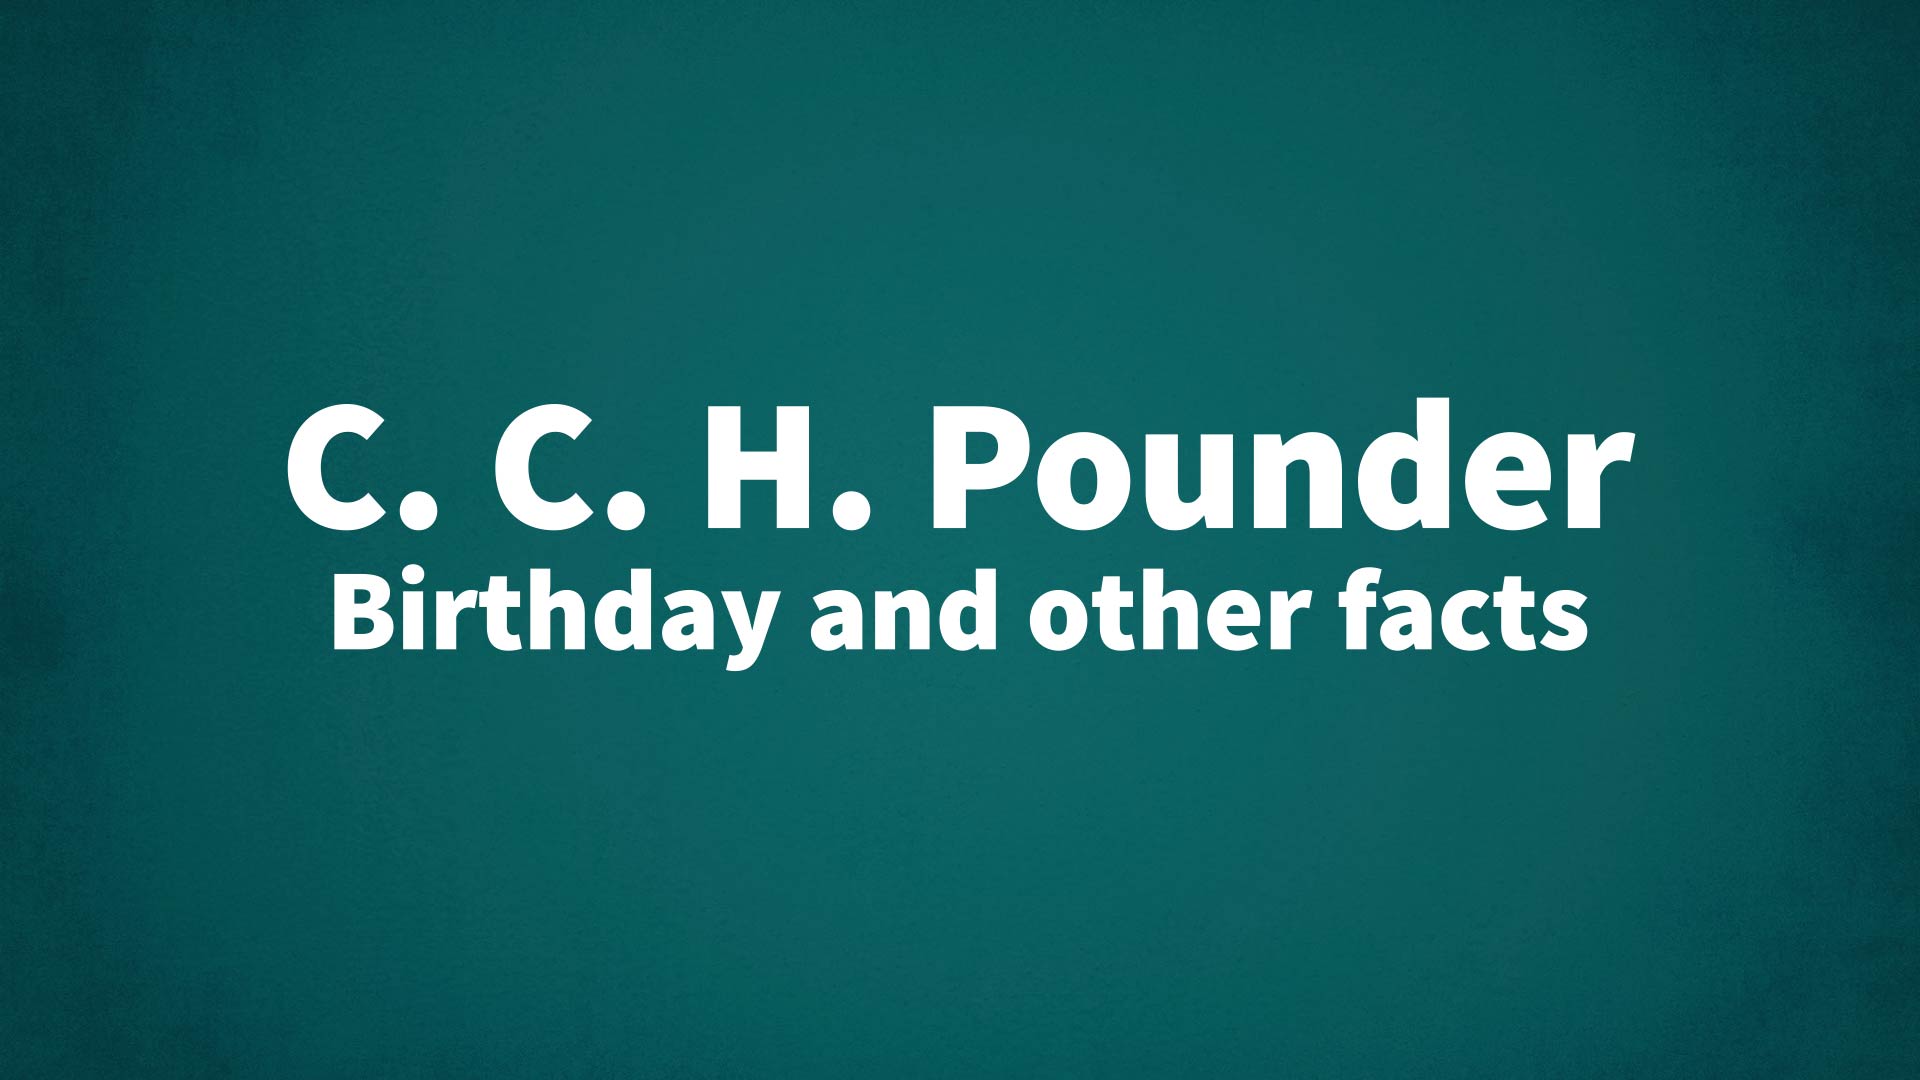 title image for C. C. H. Pounder birthday